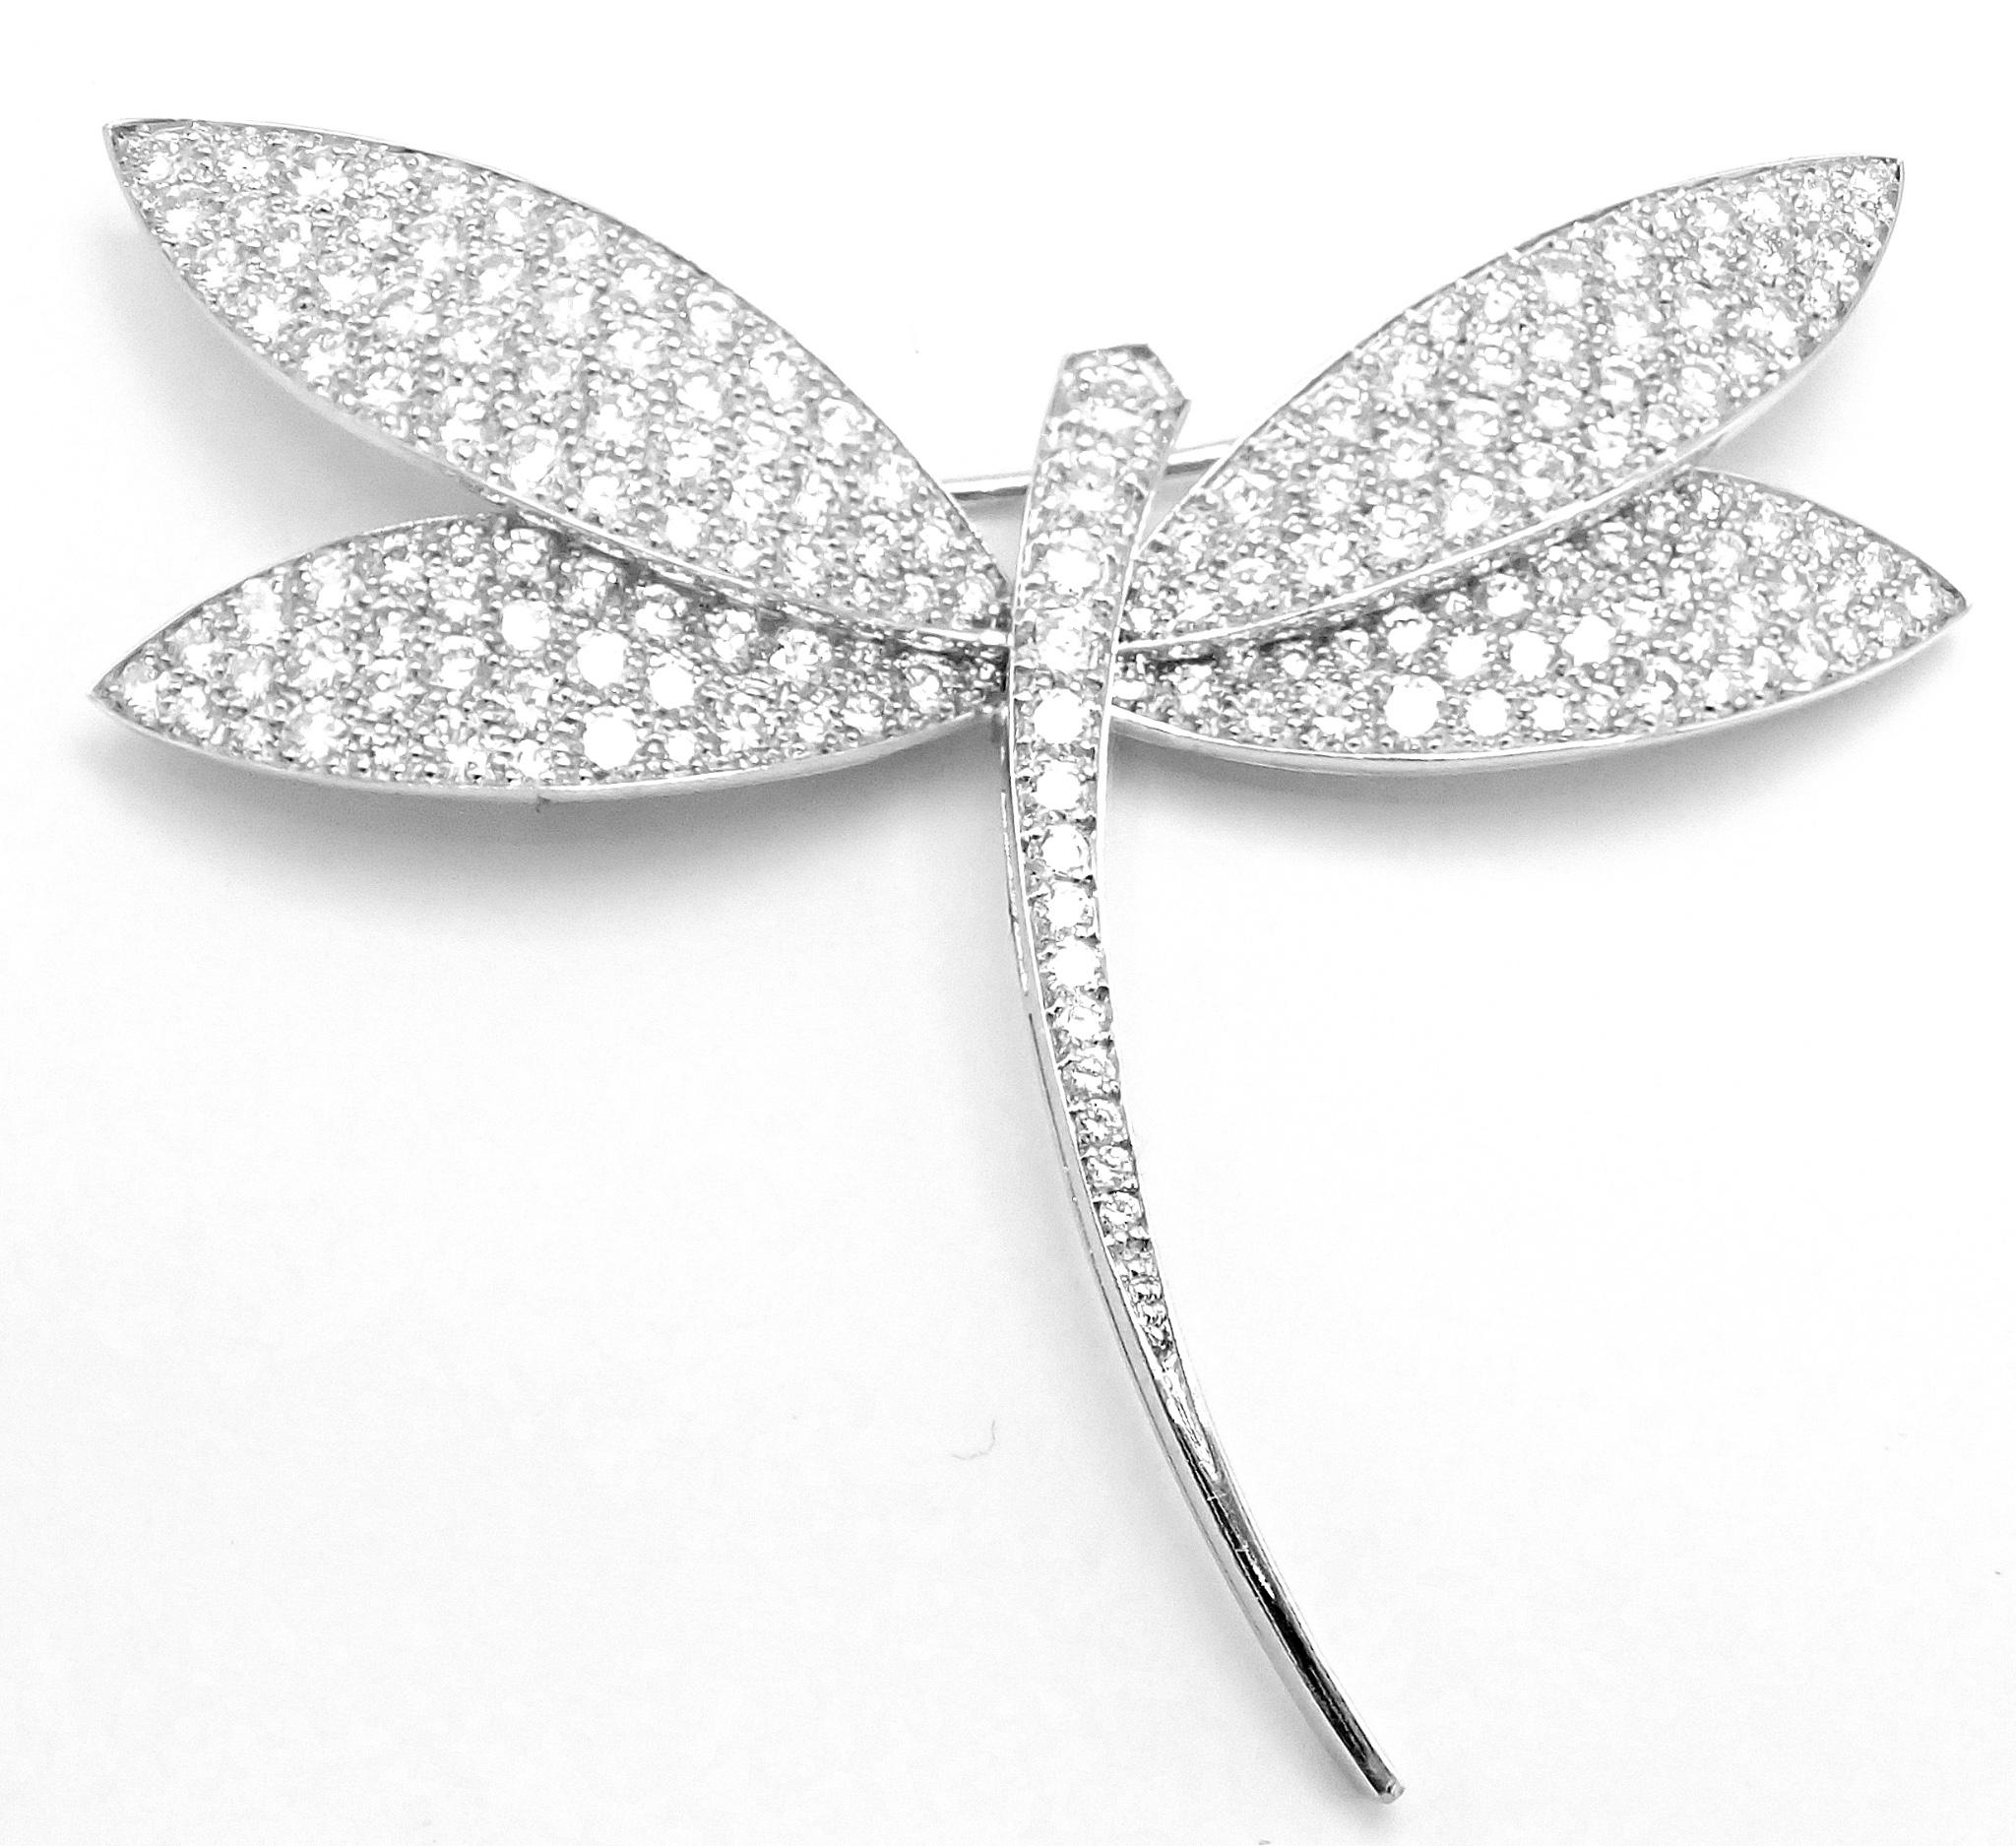 Van Cleef & Arpels Dragonfly Diamond Extra Large White Gold Pin Brooch 5